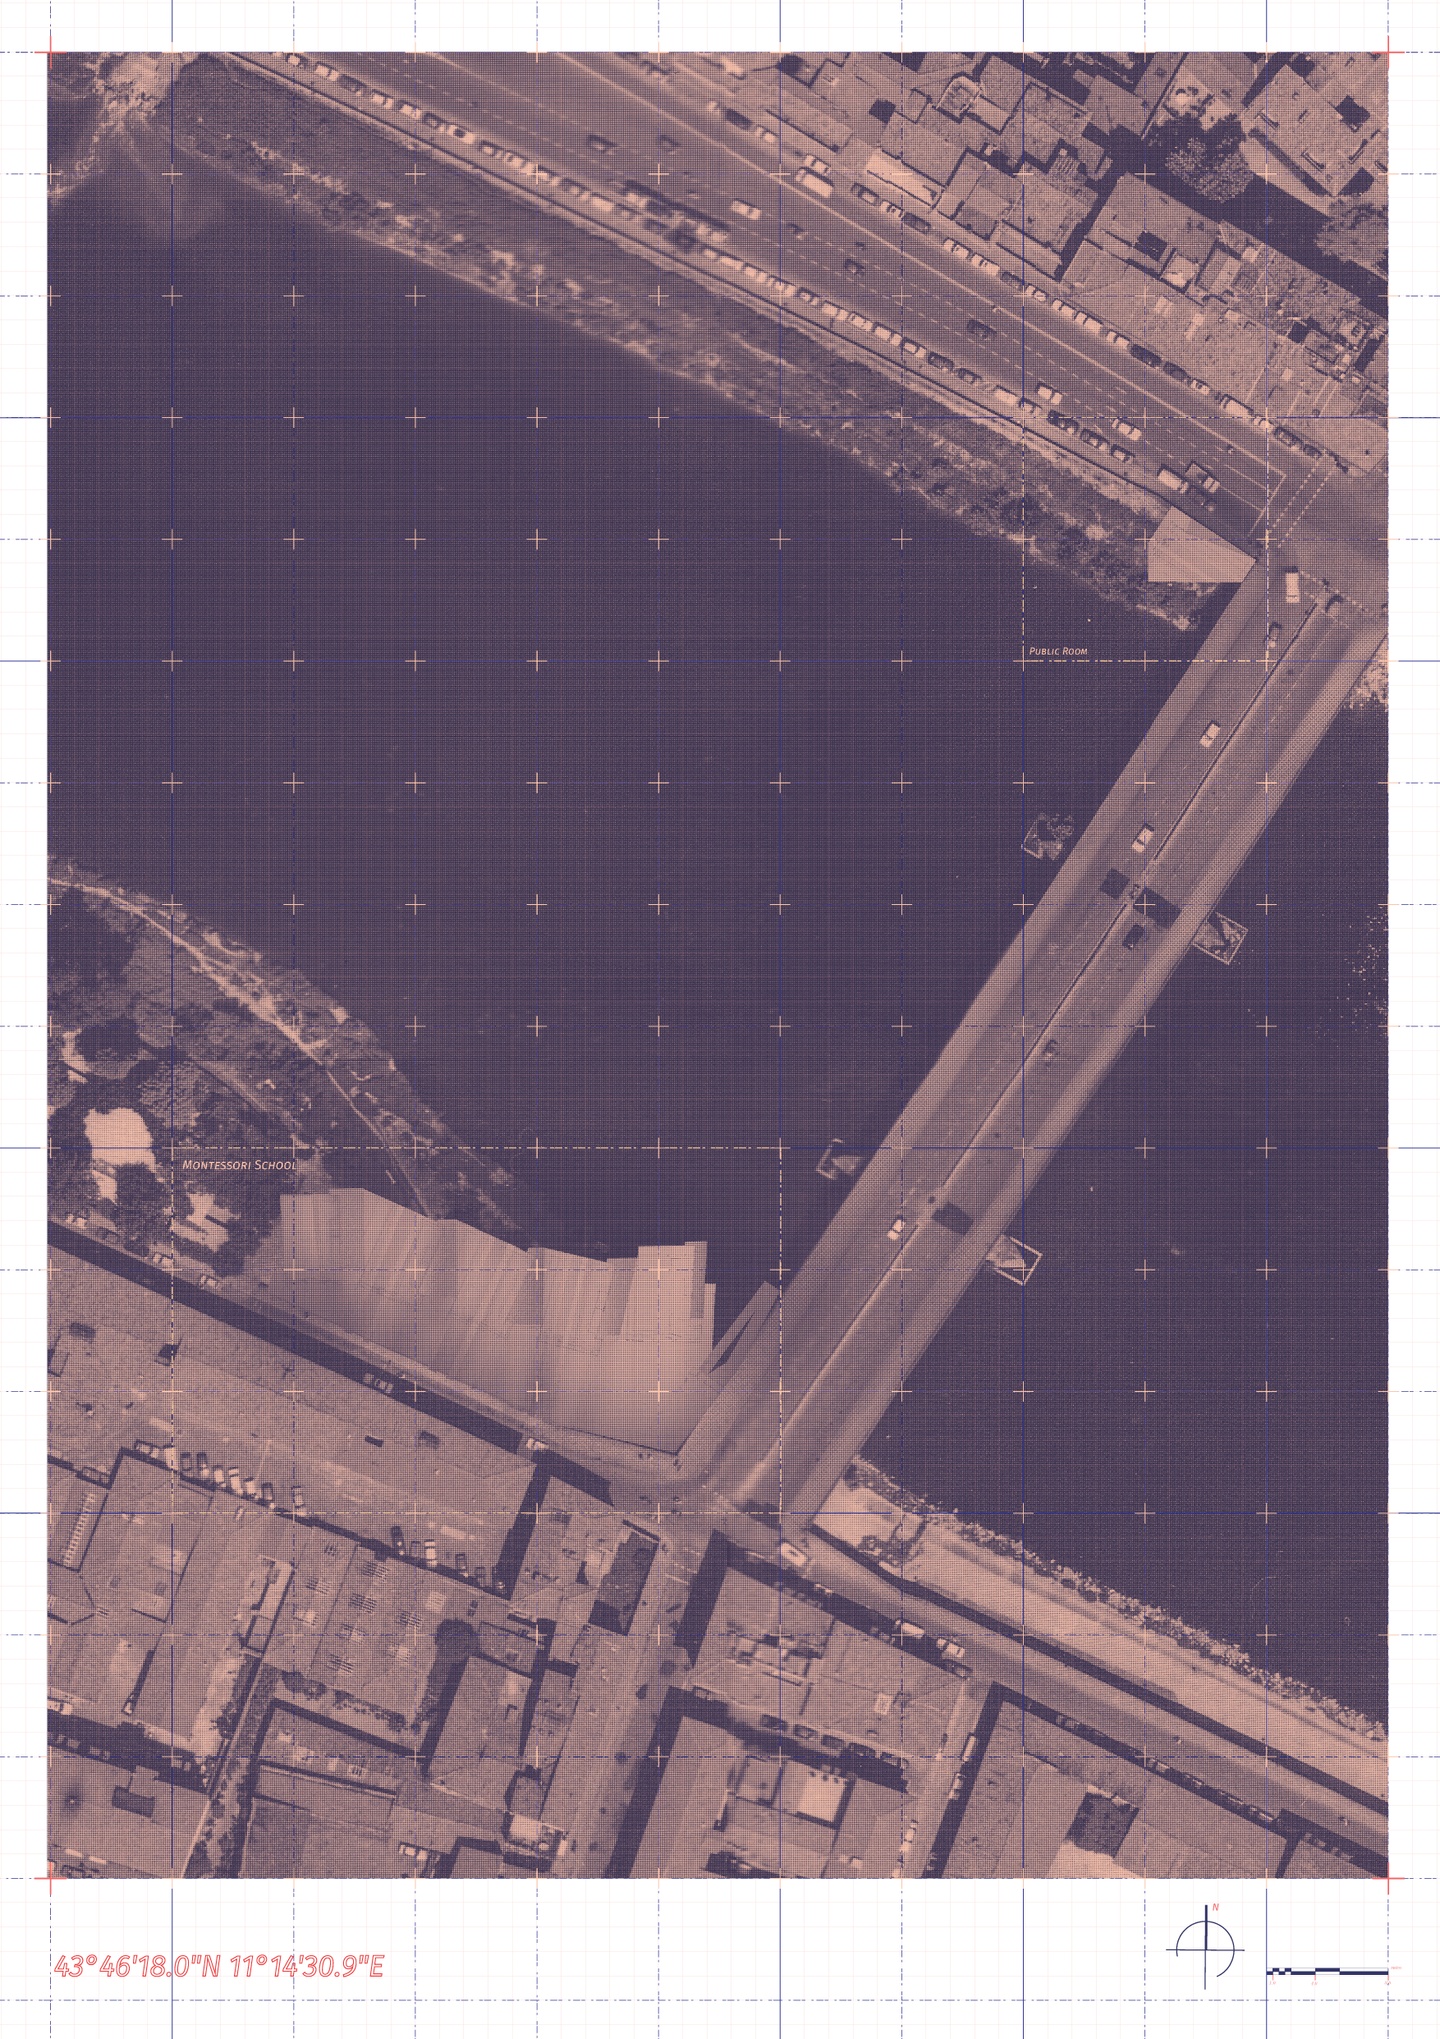 Aerial photo of a bridge across an urban canal, rendered in dark purple and pale pink duotone, with a grid structure overlaid and small notations.